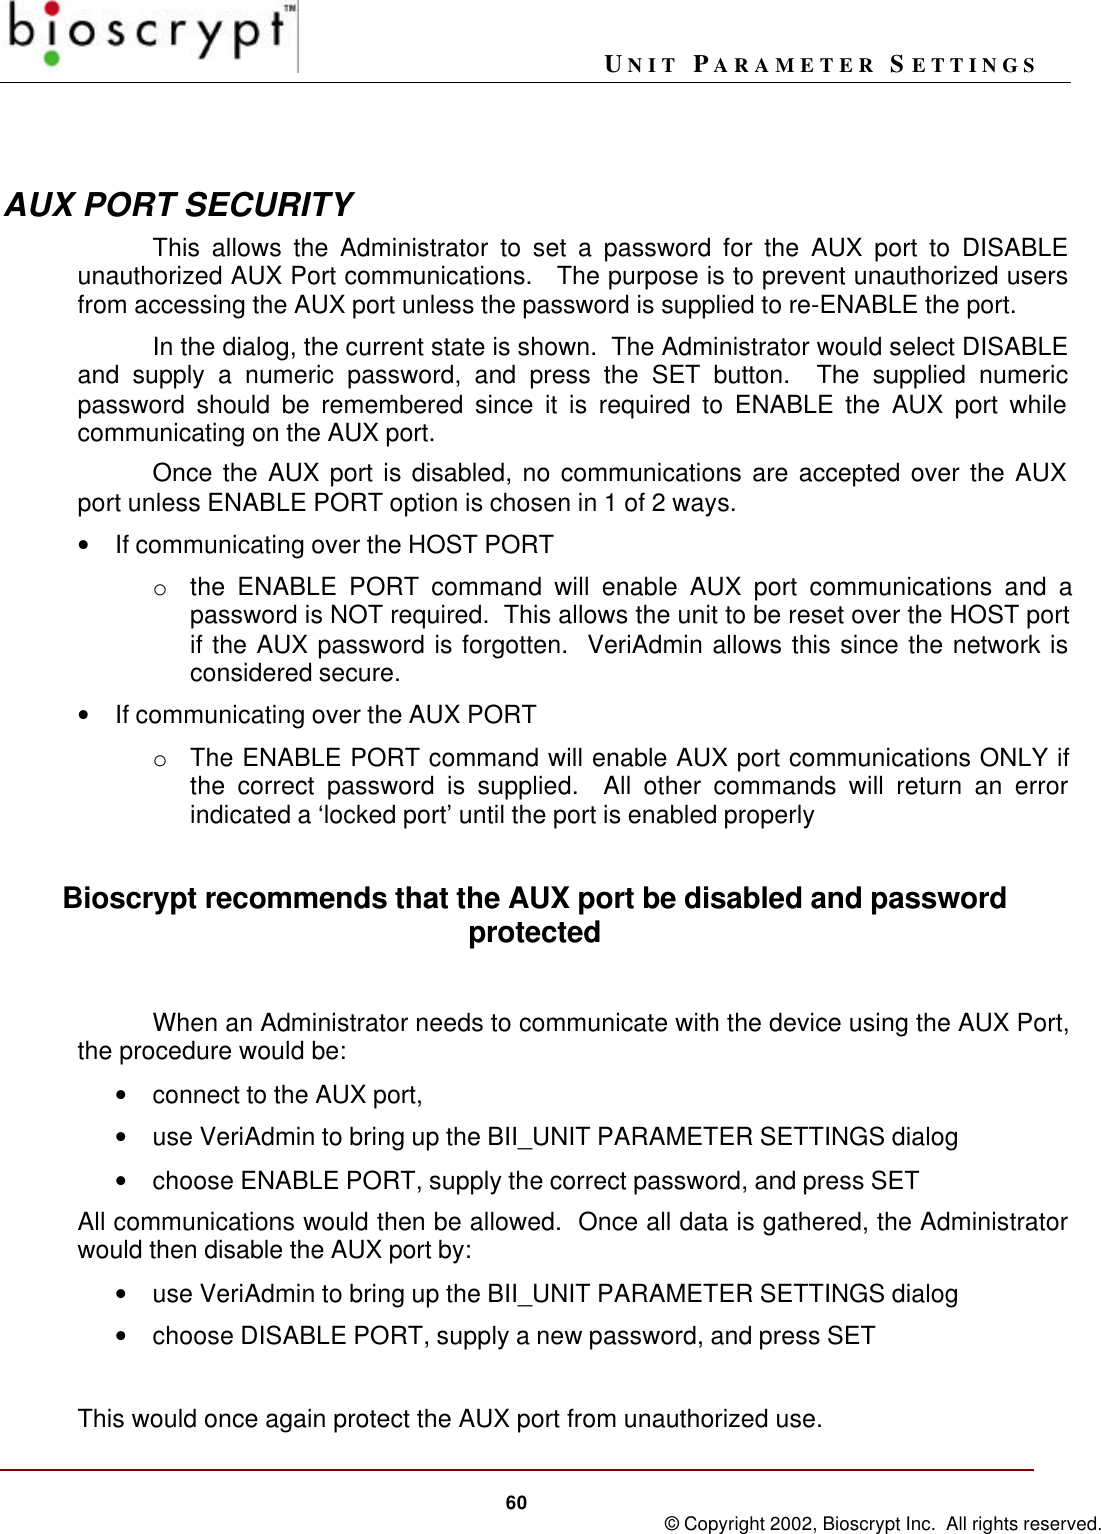 UNIT PARAMETER SETTINGS60 © Copyright 2002, Bioscrypt Inc.  All rights reserved.AUX PORT SECURITYThis allows the Administrator to set a password for the AUX port to DISABLEunauthorized AUX Port communications.   The purpose is to prevent unauthorized usersfrom accessing the AUX port unless the password is supplied to re-ENABLE the port.In the dialog, the current state is shown.  The Administrator would select DISABLEand supply a numeric password, and press the SET button.  The supplied numericpassword should be remembered since it is required to ENABLE the AUX port whilecommunicating on the AUX port.Once the AUX port is disabled, no communications are accepted over the AUXport unless ENABLE PORT option is chosen in 1 of 2 ways.• If communicating over the HOST PORTo the ENABLE PORT command will enable AUX port communications and apassword is NOT required.  This allows the unit to be reset over the HOST portif the AUX password is forgotten.  VeriAdmin allows this since the network isconsidered secure.• If communicating over the AUX PORTo The ENABLE PORT command will enable AUX port communications ONLY ifthe correct password is supplied.  All other commands will return an errorindicated a ‘locked port’ until the port is enabled properlyBioscrypt recommends that the AUX port be disabled and passwordprotectedWhen an Administrator needs to communicate with the device using the AUX Port,the procedure would be:• connect to the AUX port,• use VeriAdmin to bring up the BII_UNIT PARAMETER SETTINGS dialog• choose ENABLE PORT, supply the correct password, and press SETAll communications would then be allowed.  Once all data is gathered, the Administratorwould then disable the AUX port by:• use VeriAdmin to bring up the BII_UNIT PARAMETER SETTINGS dialog• choose DISABLE PORT, supply a new password, and press SETThis would once again protect the AUX port from unauthorized use.